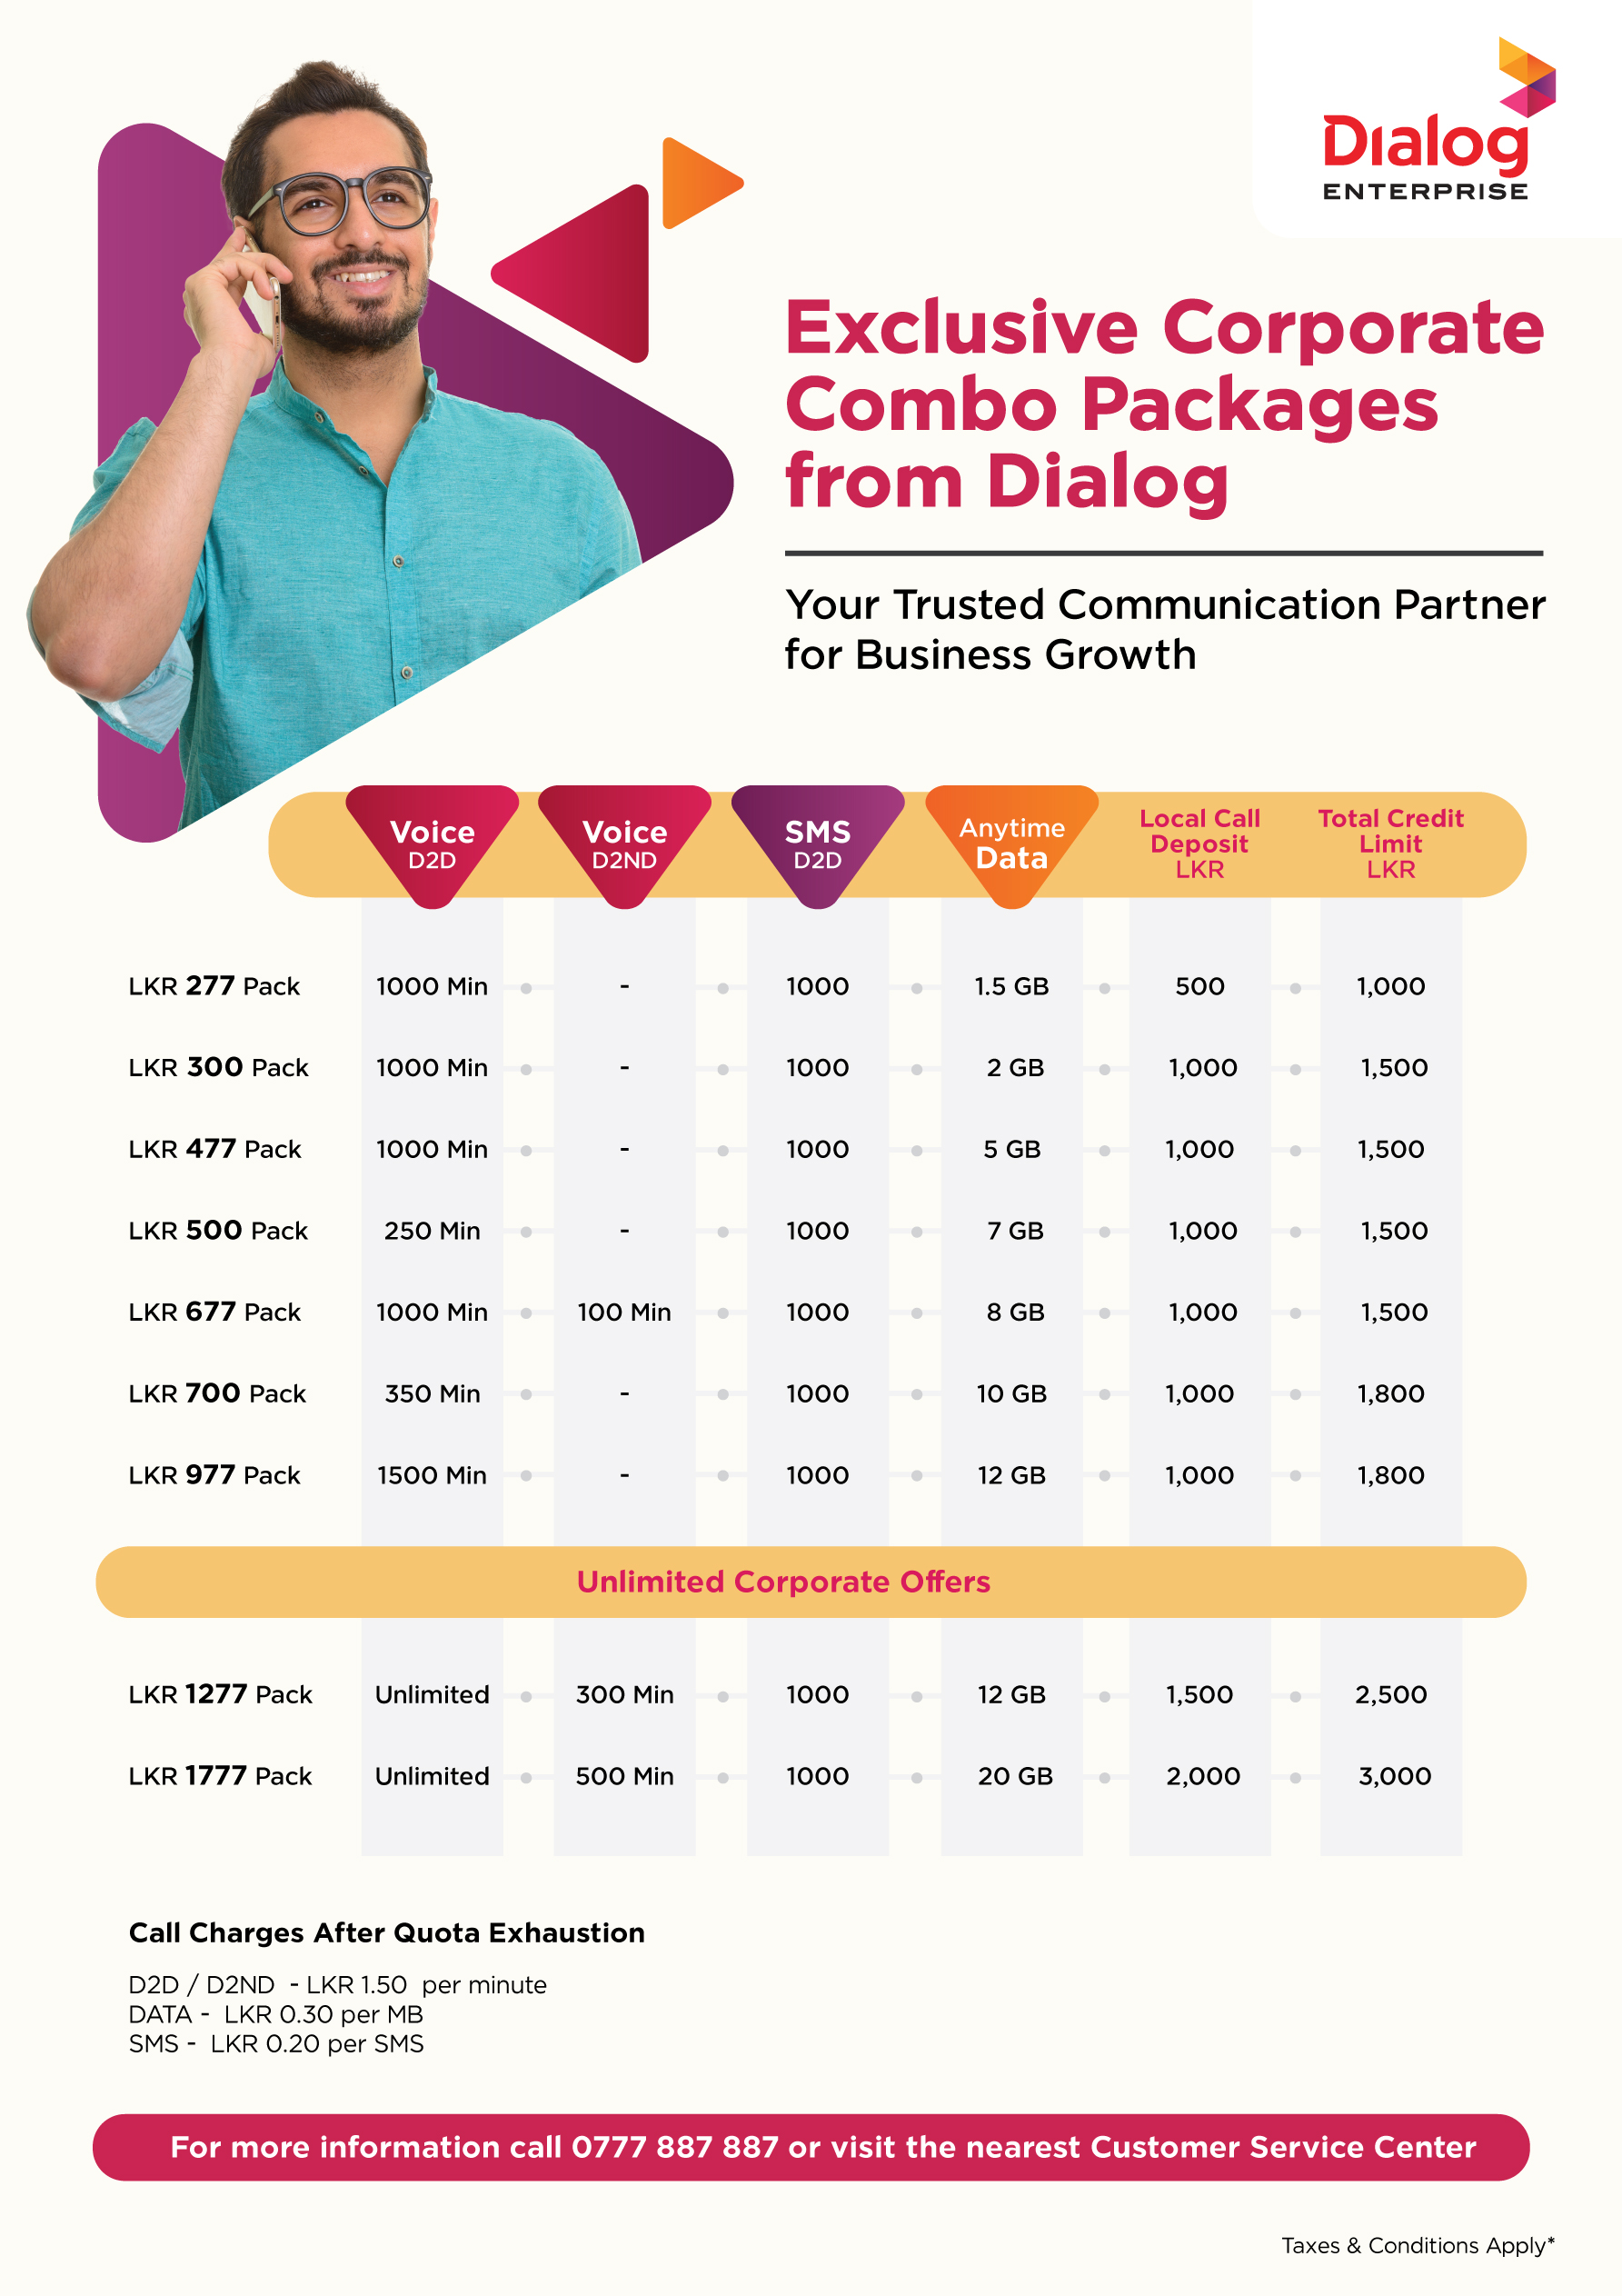 Get Customized Mobile Packages for your business including Calls, SMS and anytime data with Corporate Combo Package.